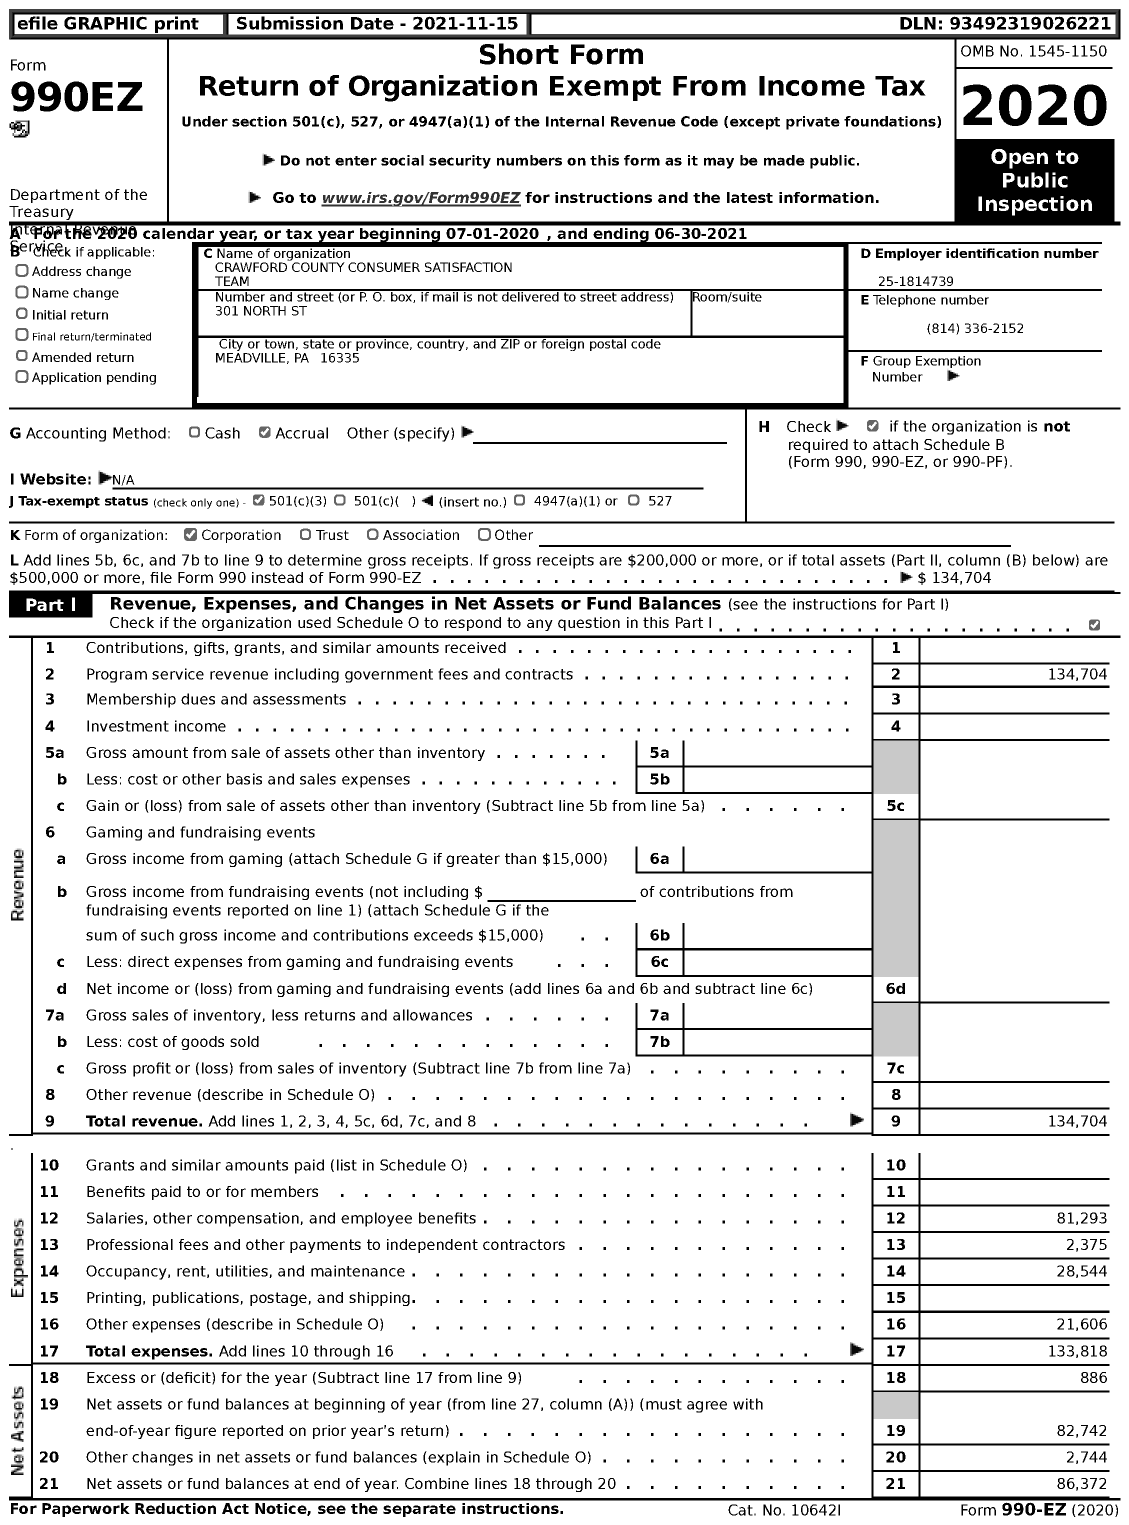 Image of first page of 2020 Form 990EZ for Crawford County Consumer Satisfaction Team